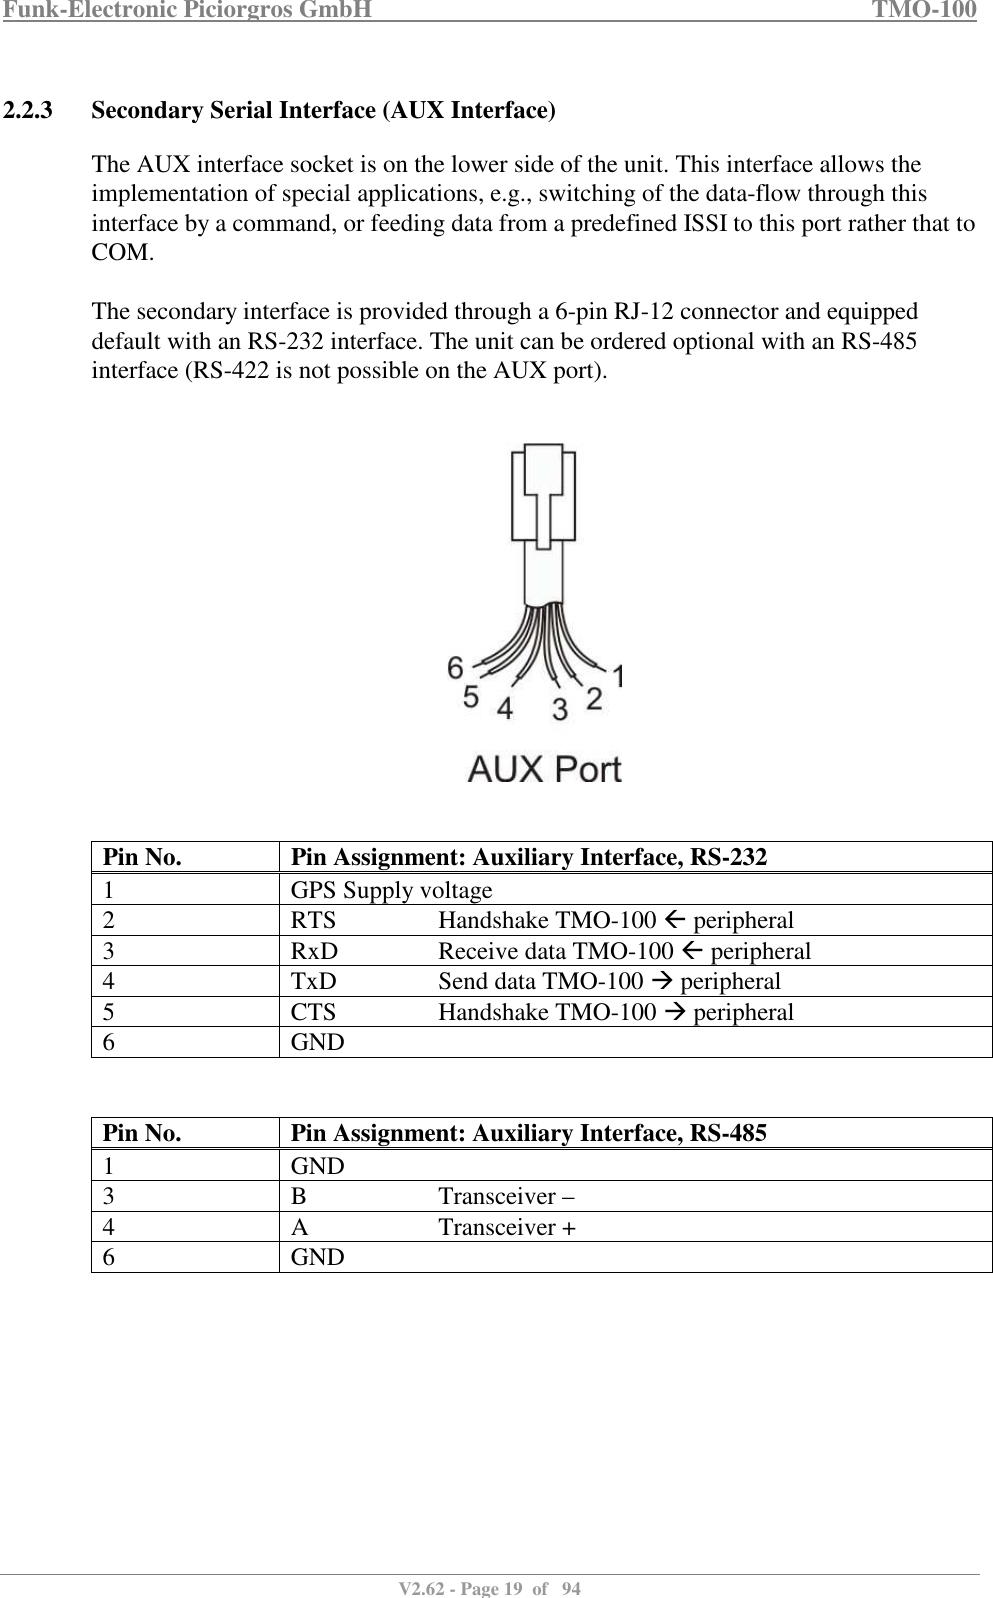 Funk-Electronic Piciorgros GmbH   TMO-100   V2.62 - Page 19  of   94   2.2.3 Secondary Serial Interface (AUX Interface) The AUX interface socket is on the lower side of the unit. This interface allows the implementation of special applications, e.g., switching of the data-flow through this interface by a command, or feeding data from a predefined ISSI to this port rather that to COM.  The secondary interface is provided through a 6-pin RJ-12 connector and equipped default with an RS-232 interface. The unit can be ordered optional with an RS-485 interface (RS-422 is not possible on the AUX port).      Pin No.  Pin Assignment: Auxiliary Interface, RS-232 1  GPS Supply voltage 2  RTS    Handshake TMO-100  peripheral 3  RxD    Receive data TMO-100  peripheral 4  TxD    Send data TMO-100  peripheral 5  CTS    Handshake TMO-100  peripheral 6  GND   Pin No.  Pin Assignment: Auxiliary Interface, RS-485 1  GND 3  B    Transceiver – 4  A    Transceiver + 6  GND  